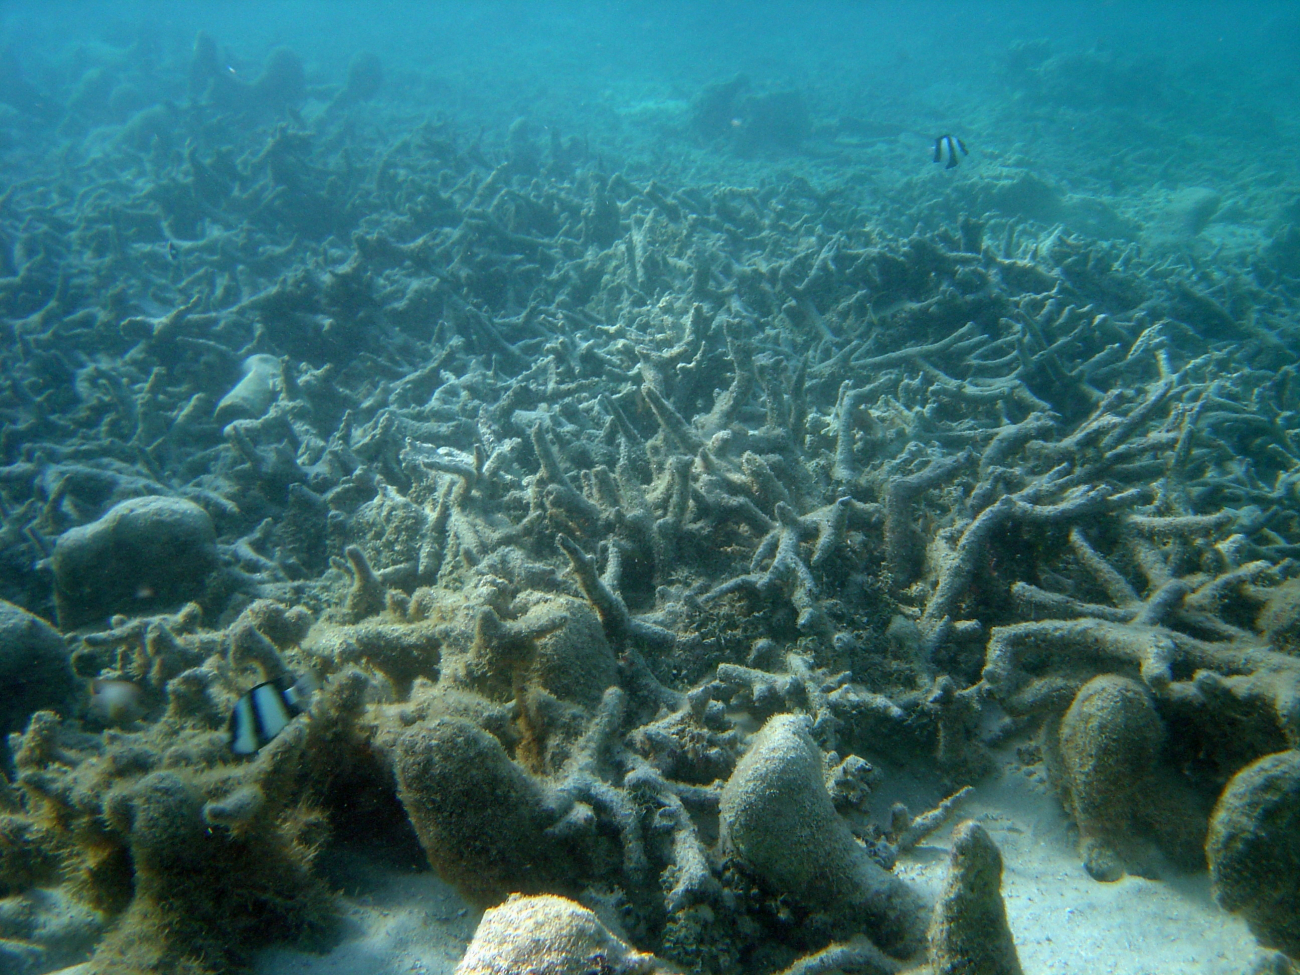 A few fish wander through the remains of a dead reef